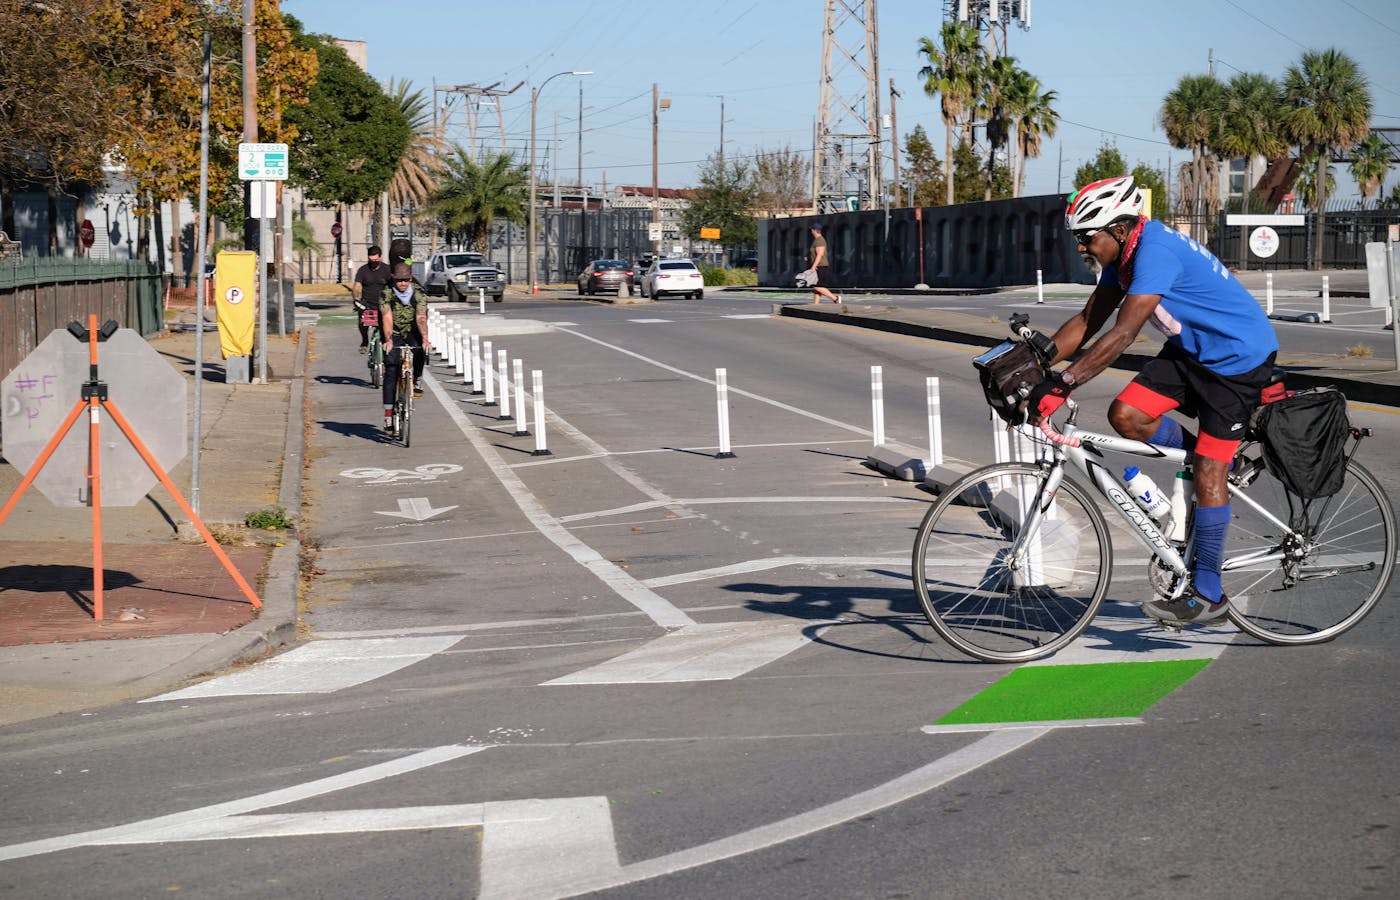 A protected bike lane in New Orleans, Louisiana.